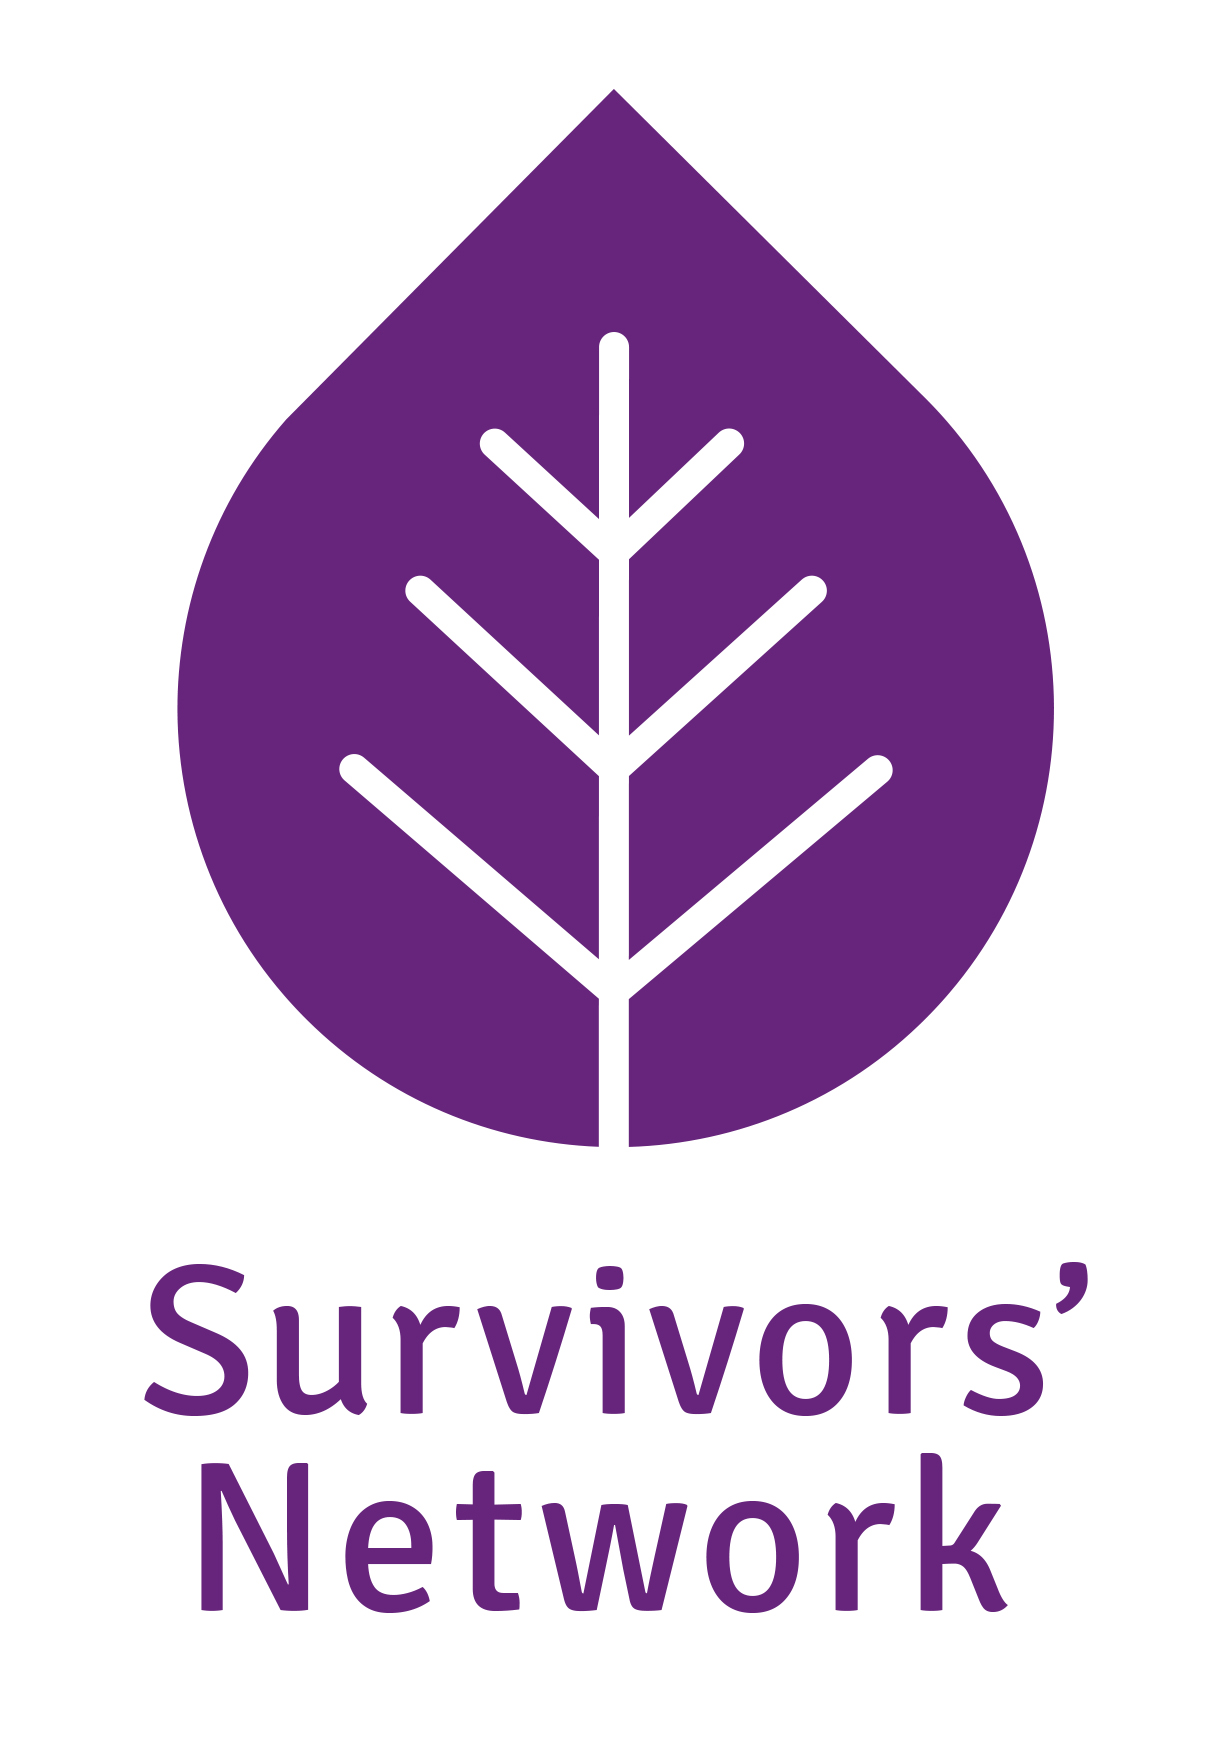 The Survivor's Network Logo. Its a round leaf in a vertical position, the stem parts look like a twiggy tree growing in side. The logo is purple and underneath it reads 